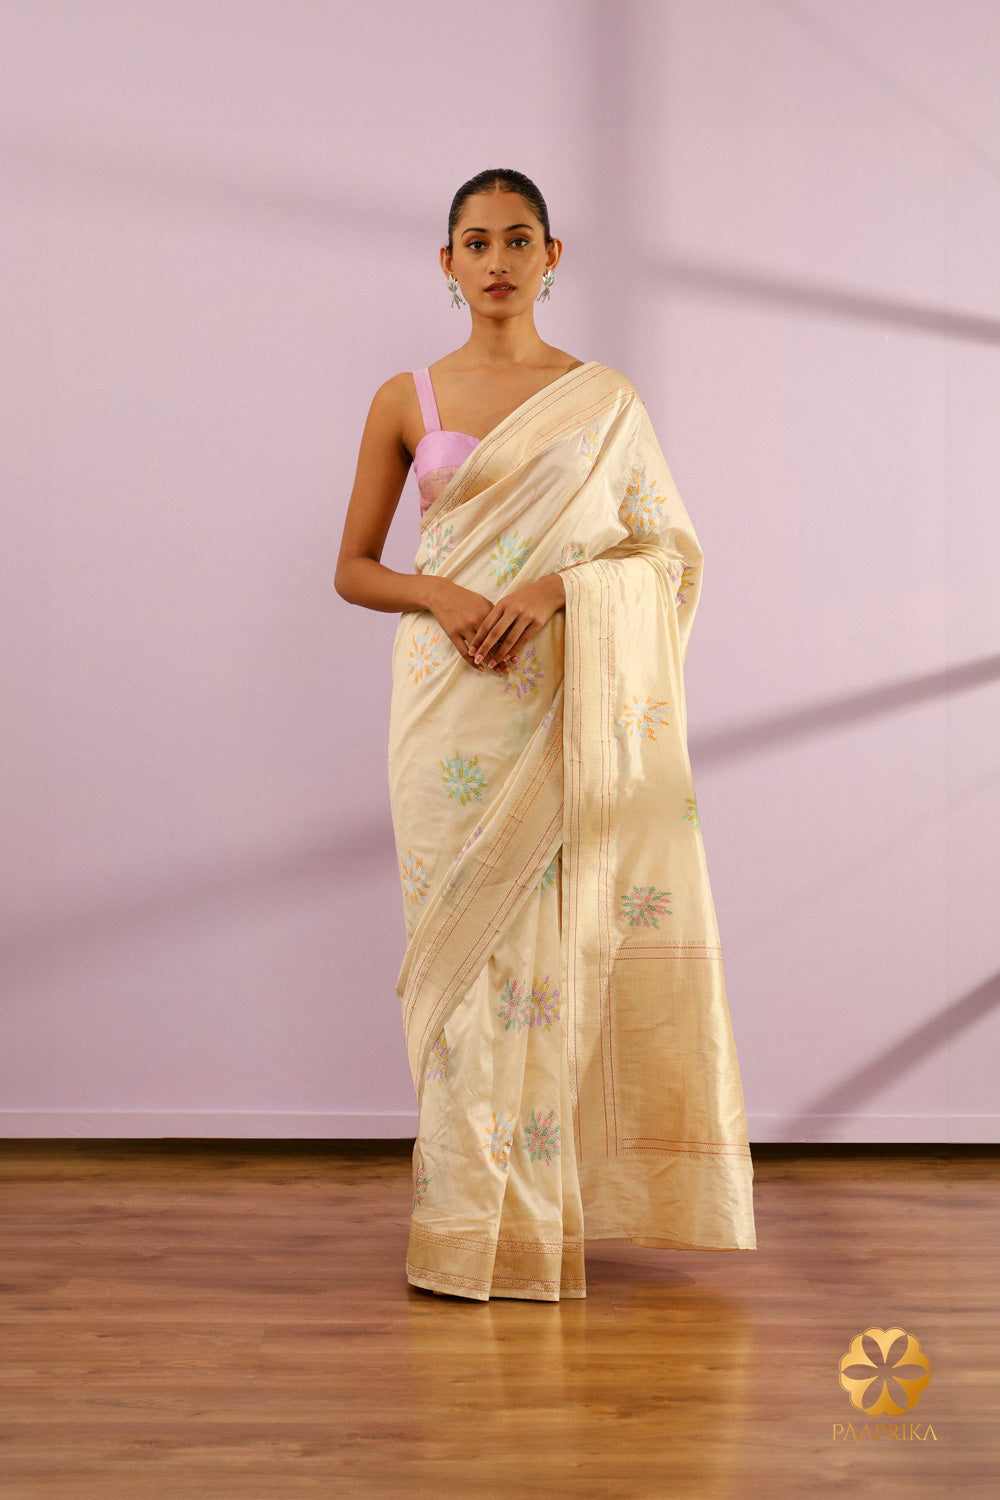 A full view of the "Elegant Ivory Banarasi Saree." The ivory saree is elegantly draped, showcasing its pristine color and the intricate pastel floral motifs running along its length.